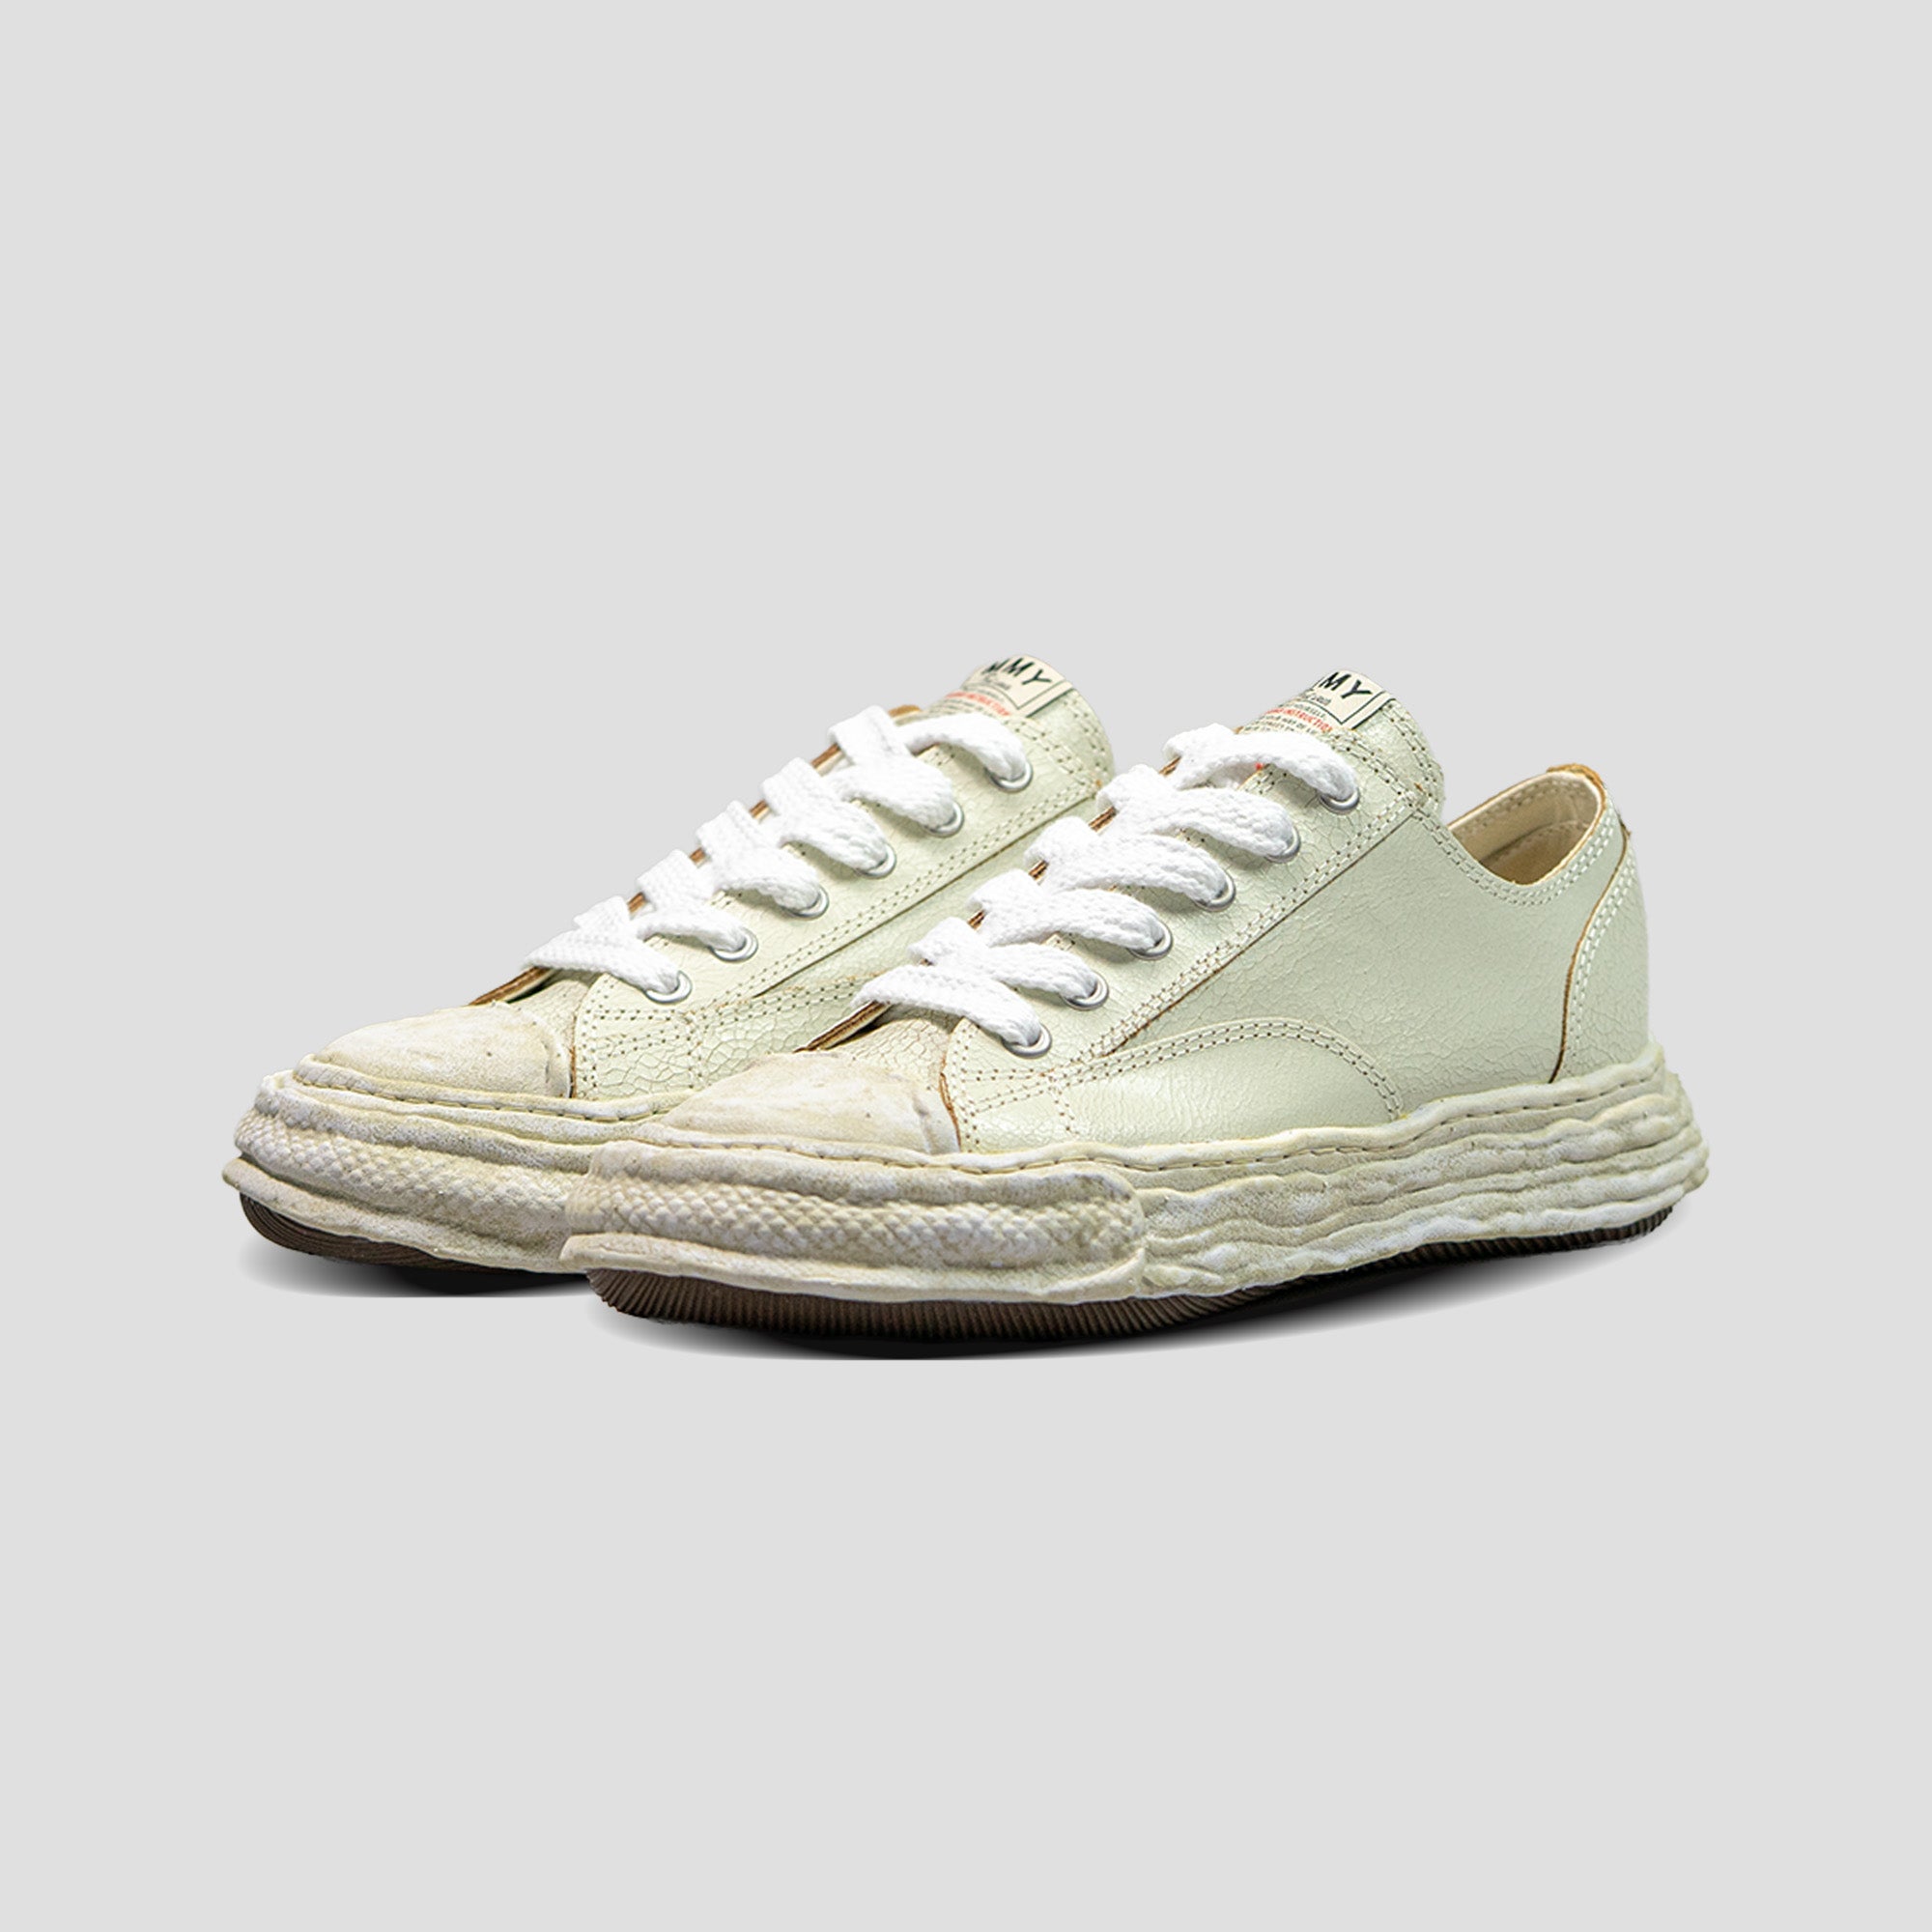 PETERSON 23 OG SOLE LOW-TOP CRACK LEATHER SNEAKERS